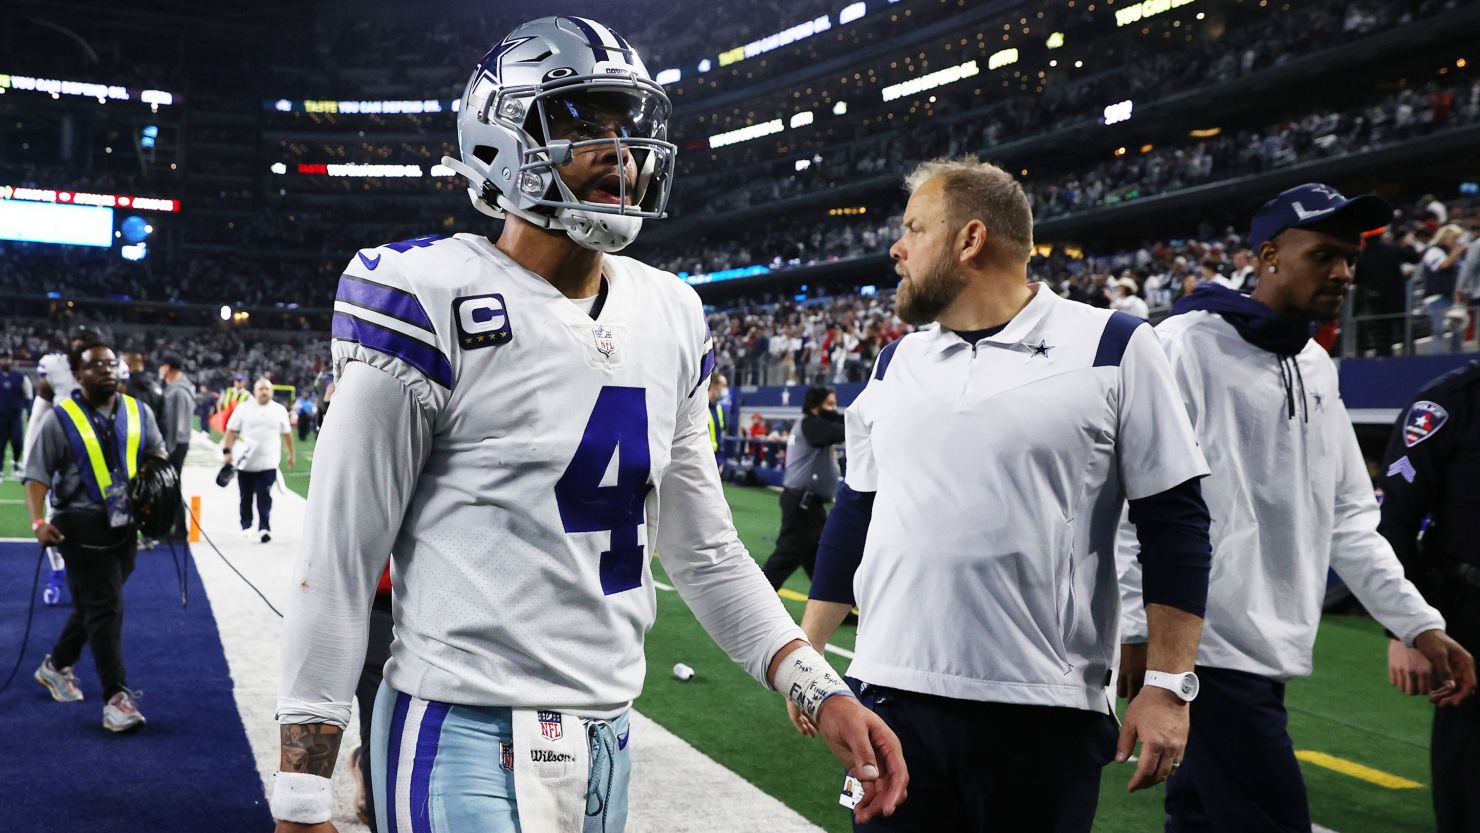 Dak Prescott walks off the field after losing to the San Francisco 49ers in the NFC wild card playoff game.